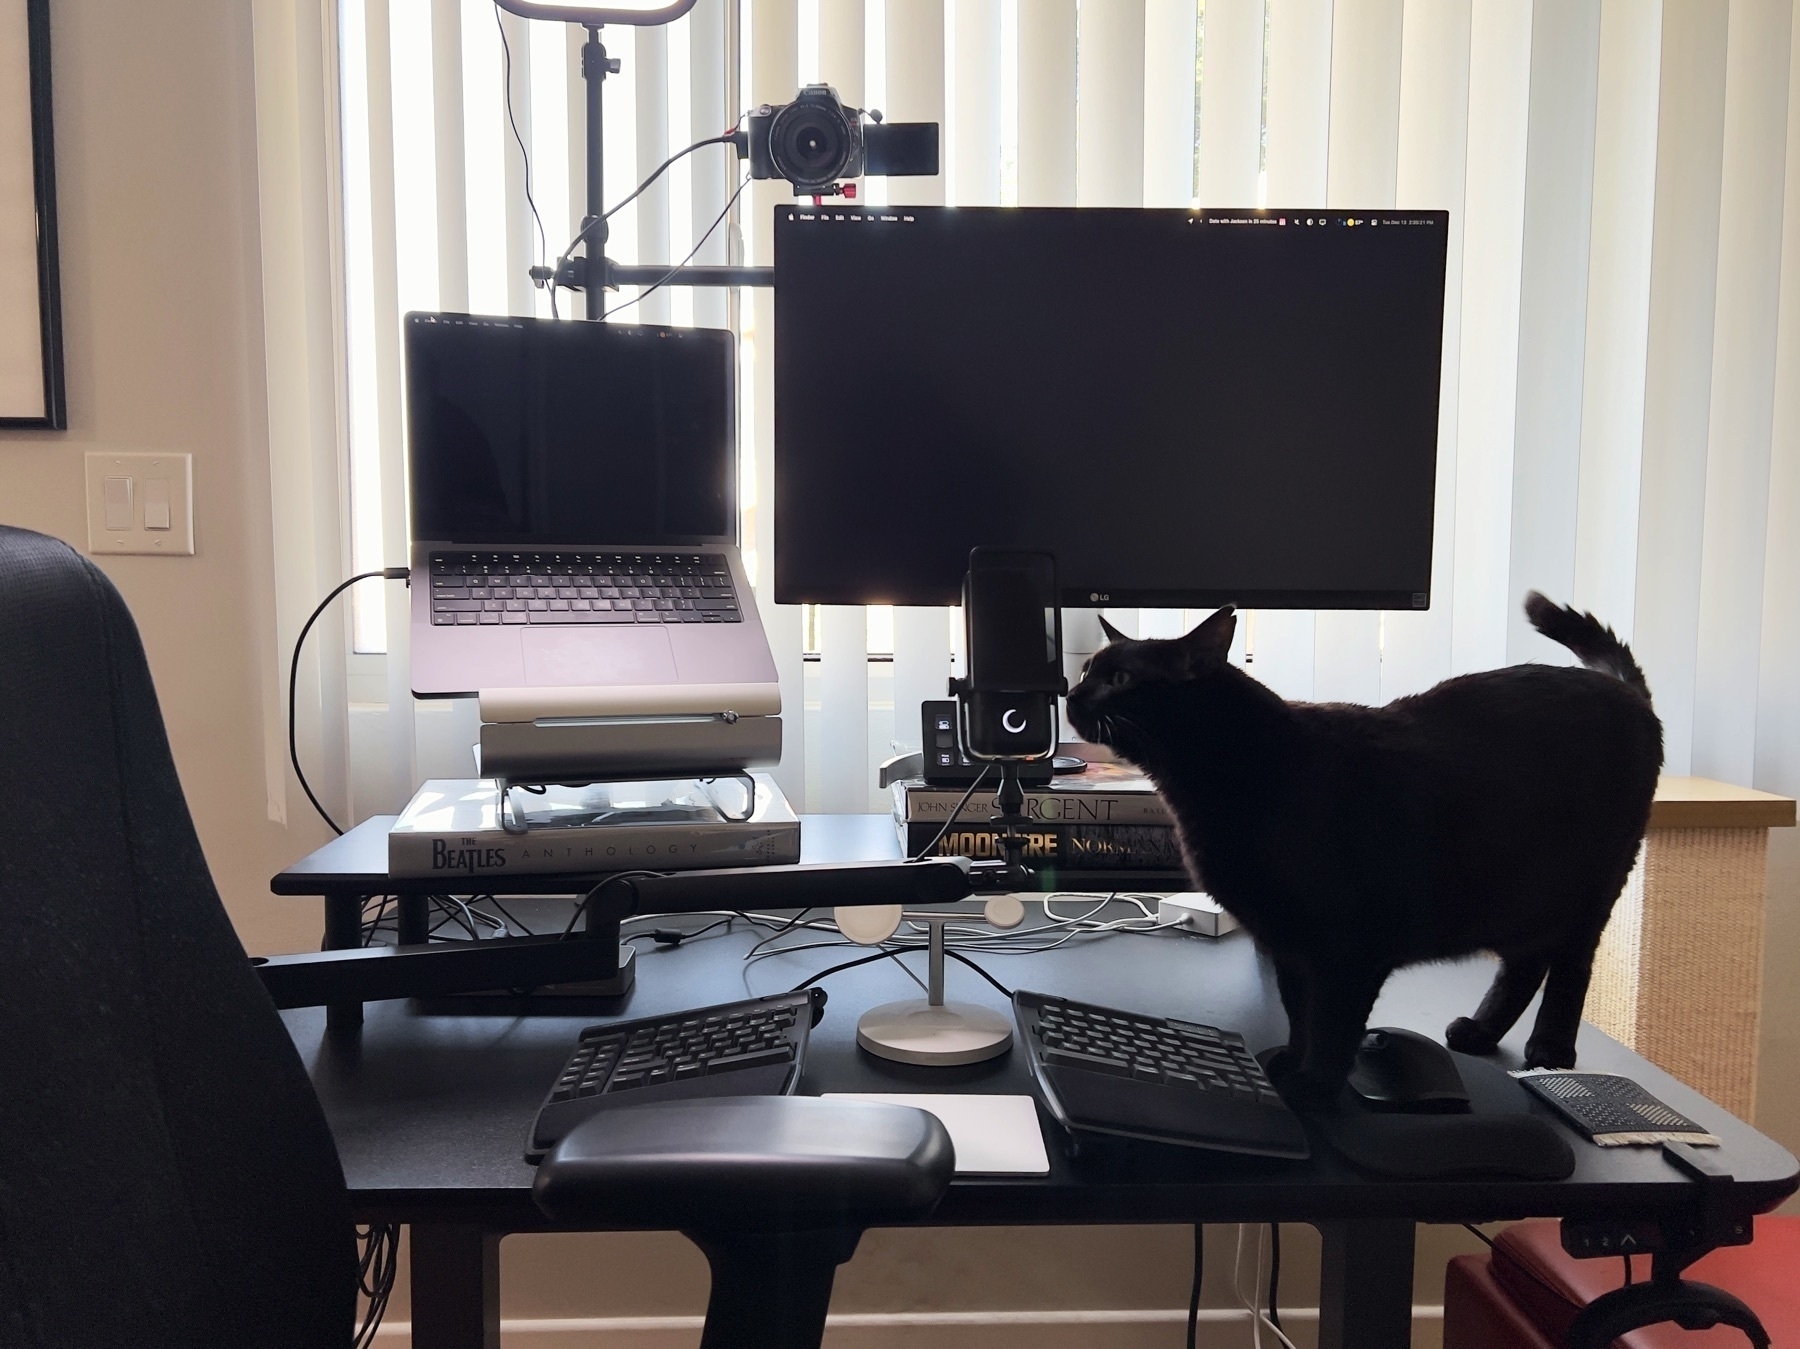 Workstation with MacBook Pro, external display, and Stewie the cat (not typically included).